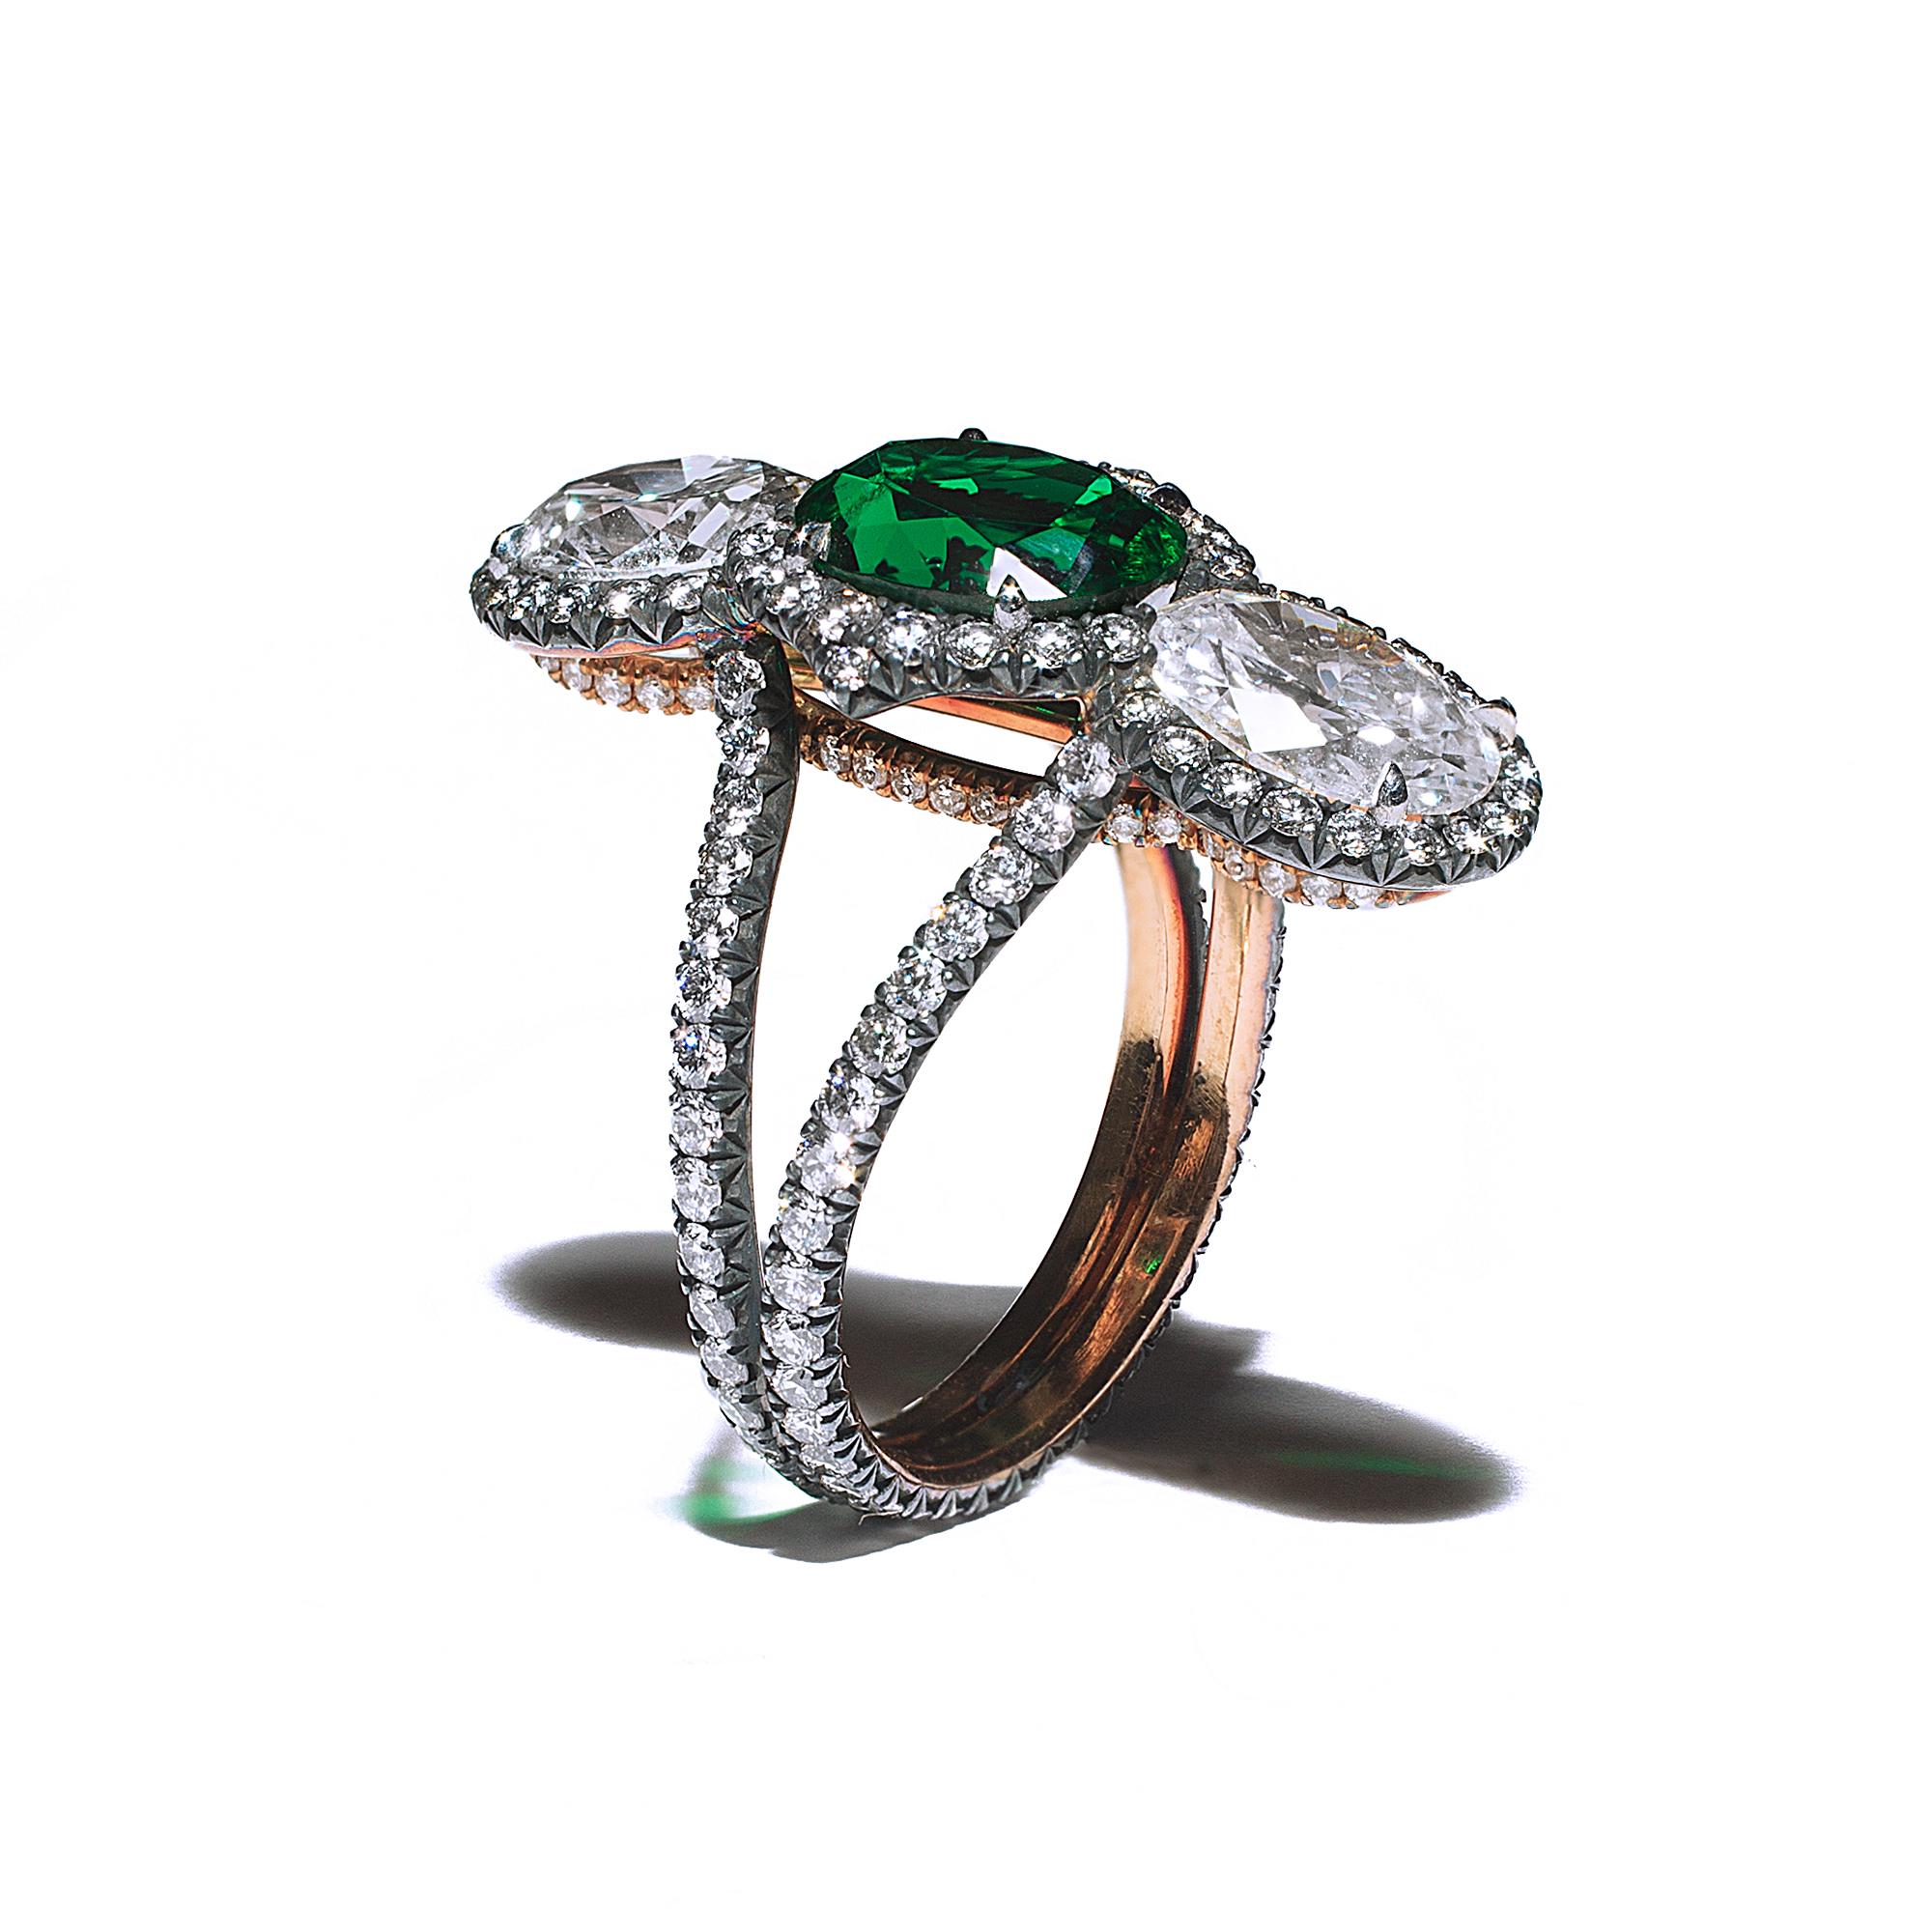 A 20kt rose gold & oxidized silver ring centered upon a 1.95 carat oval “no oil” Zambian emerald, certified by GIA and C. Dunaigre, designed in a vertical style and set with two oval diamonds weighing 2.43 carts total of G color and VS1 and VVS2